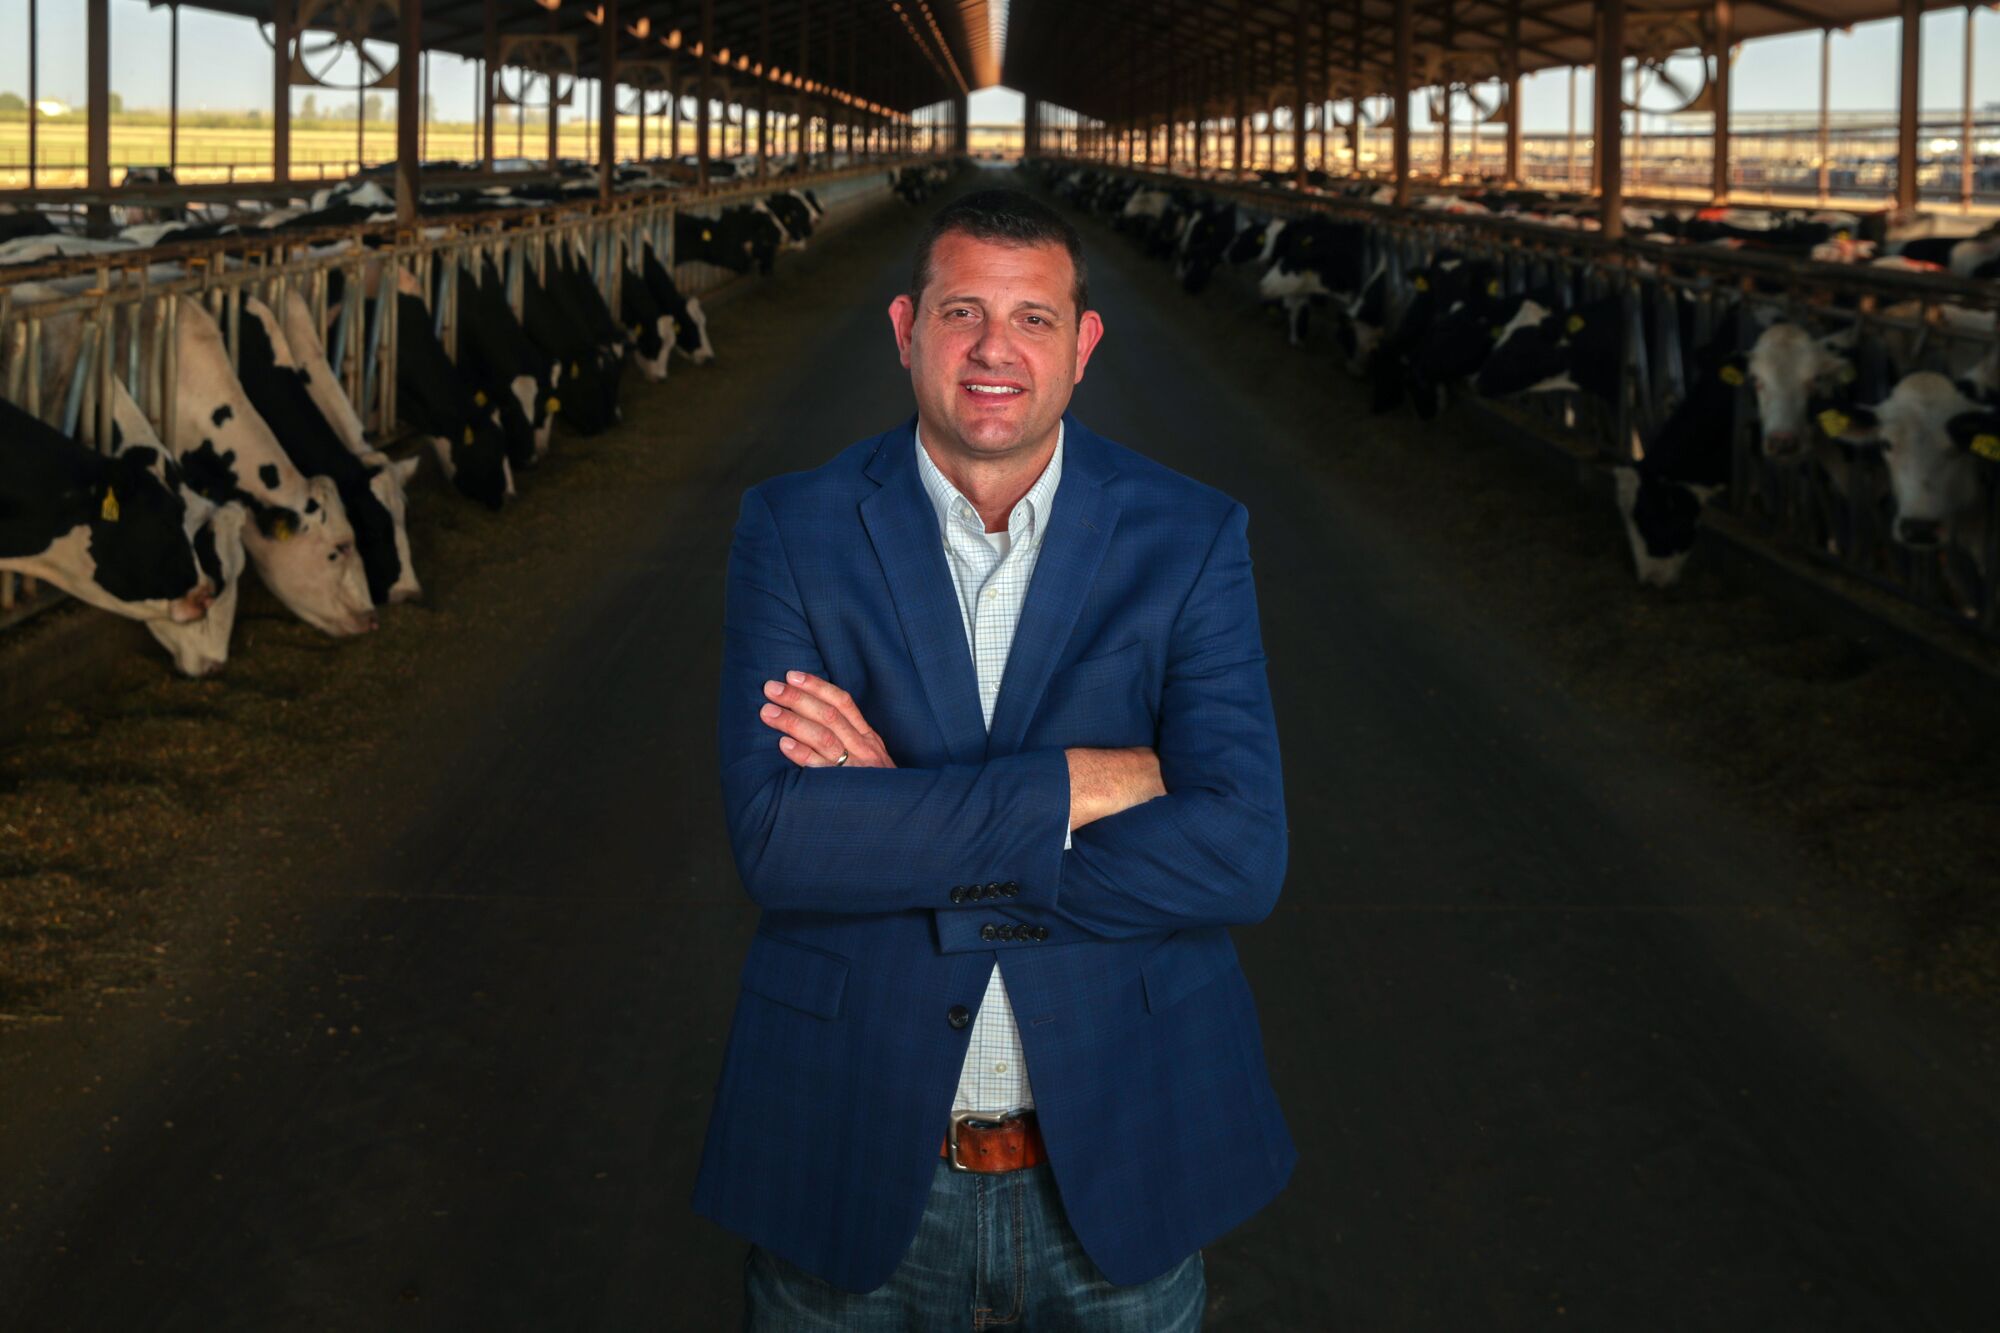 David Valadao stands in between lines of cows at his family's dairy operation.